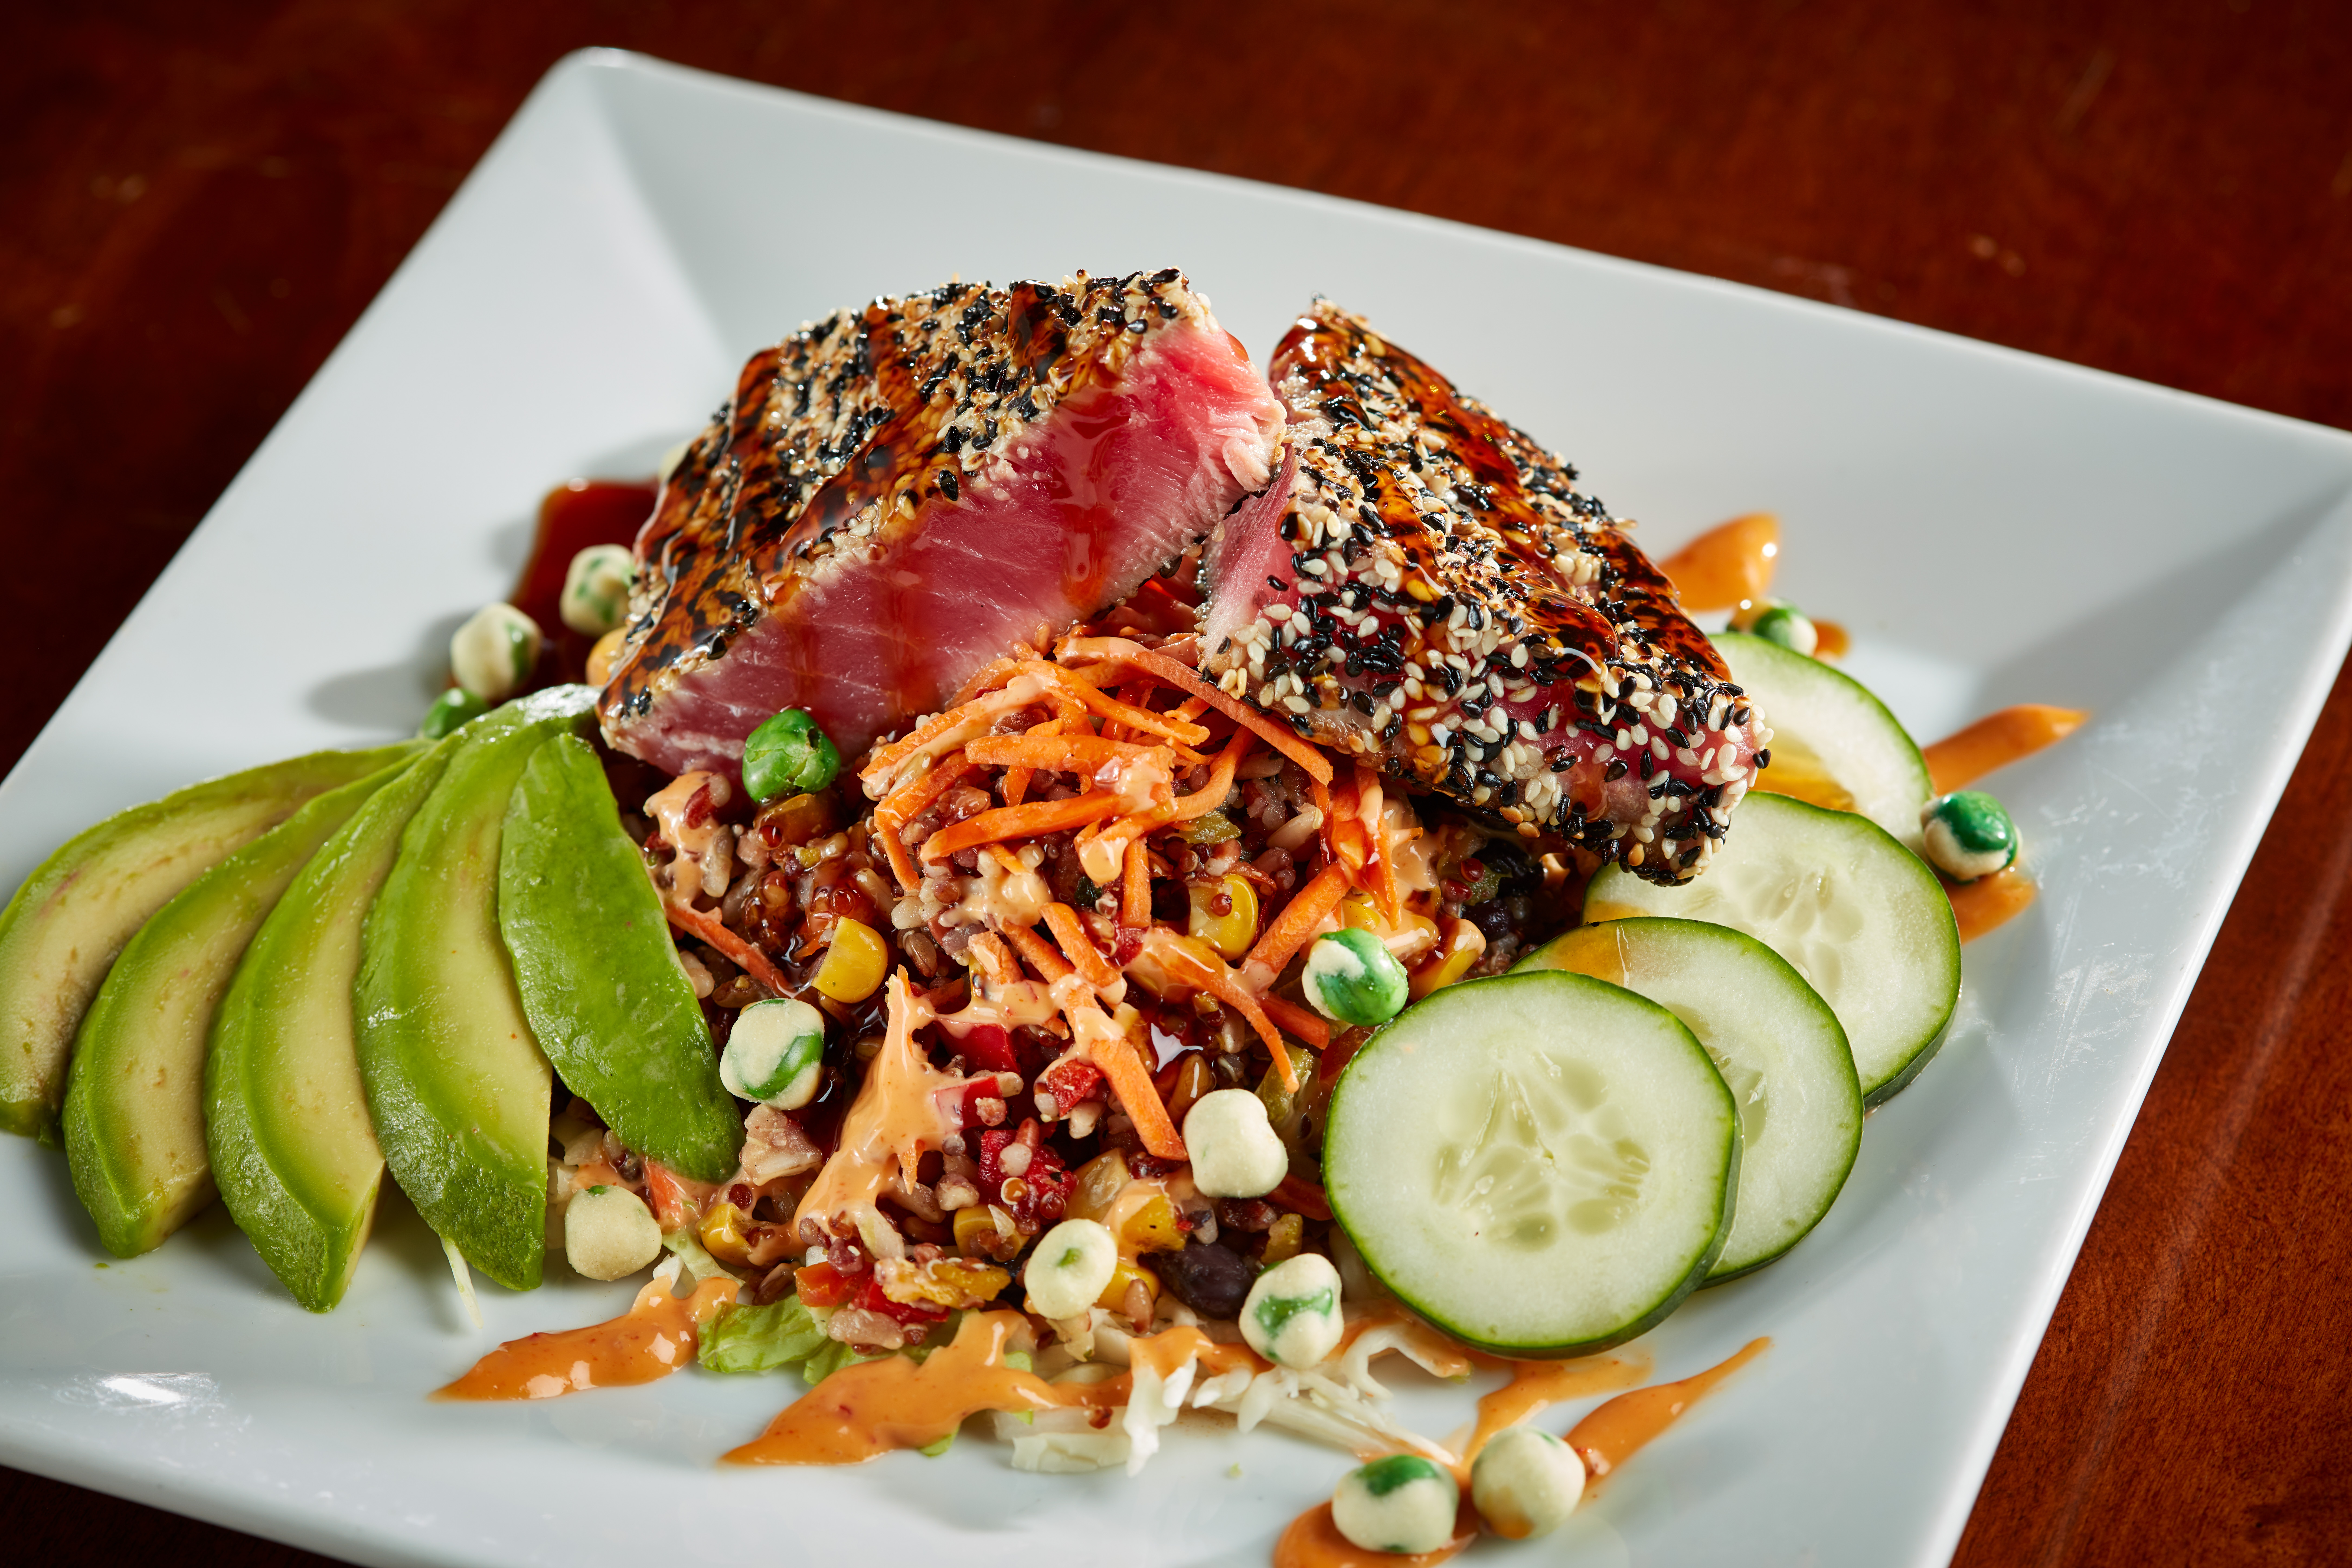 Seared sesame crusted tuna over shredded cabbage and fire-roasted grains, topped with bang-bang sauce. Garnished with sliced cucumber, avocado, a teriyaki glaze and wasabi peas. $18.99